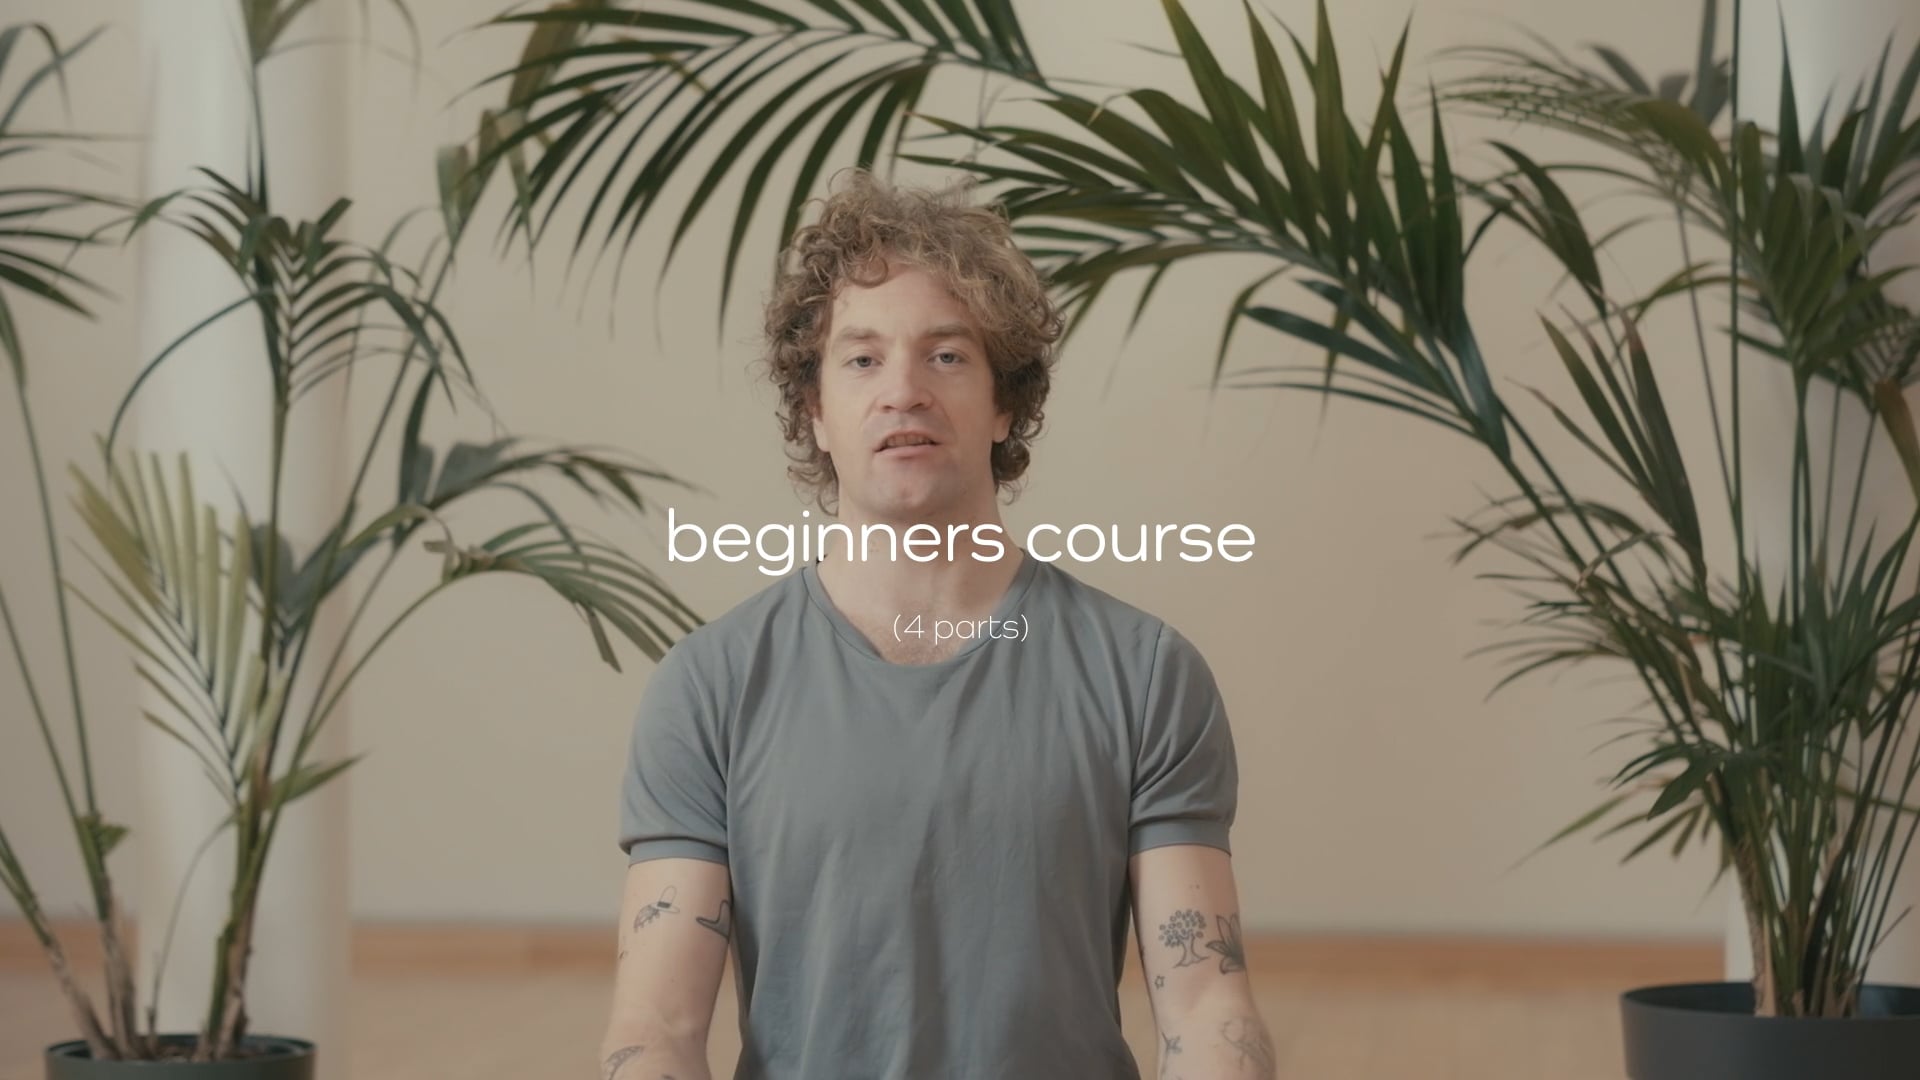 An Intro to our Beginners Course